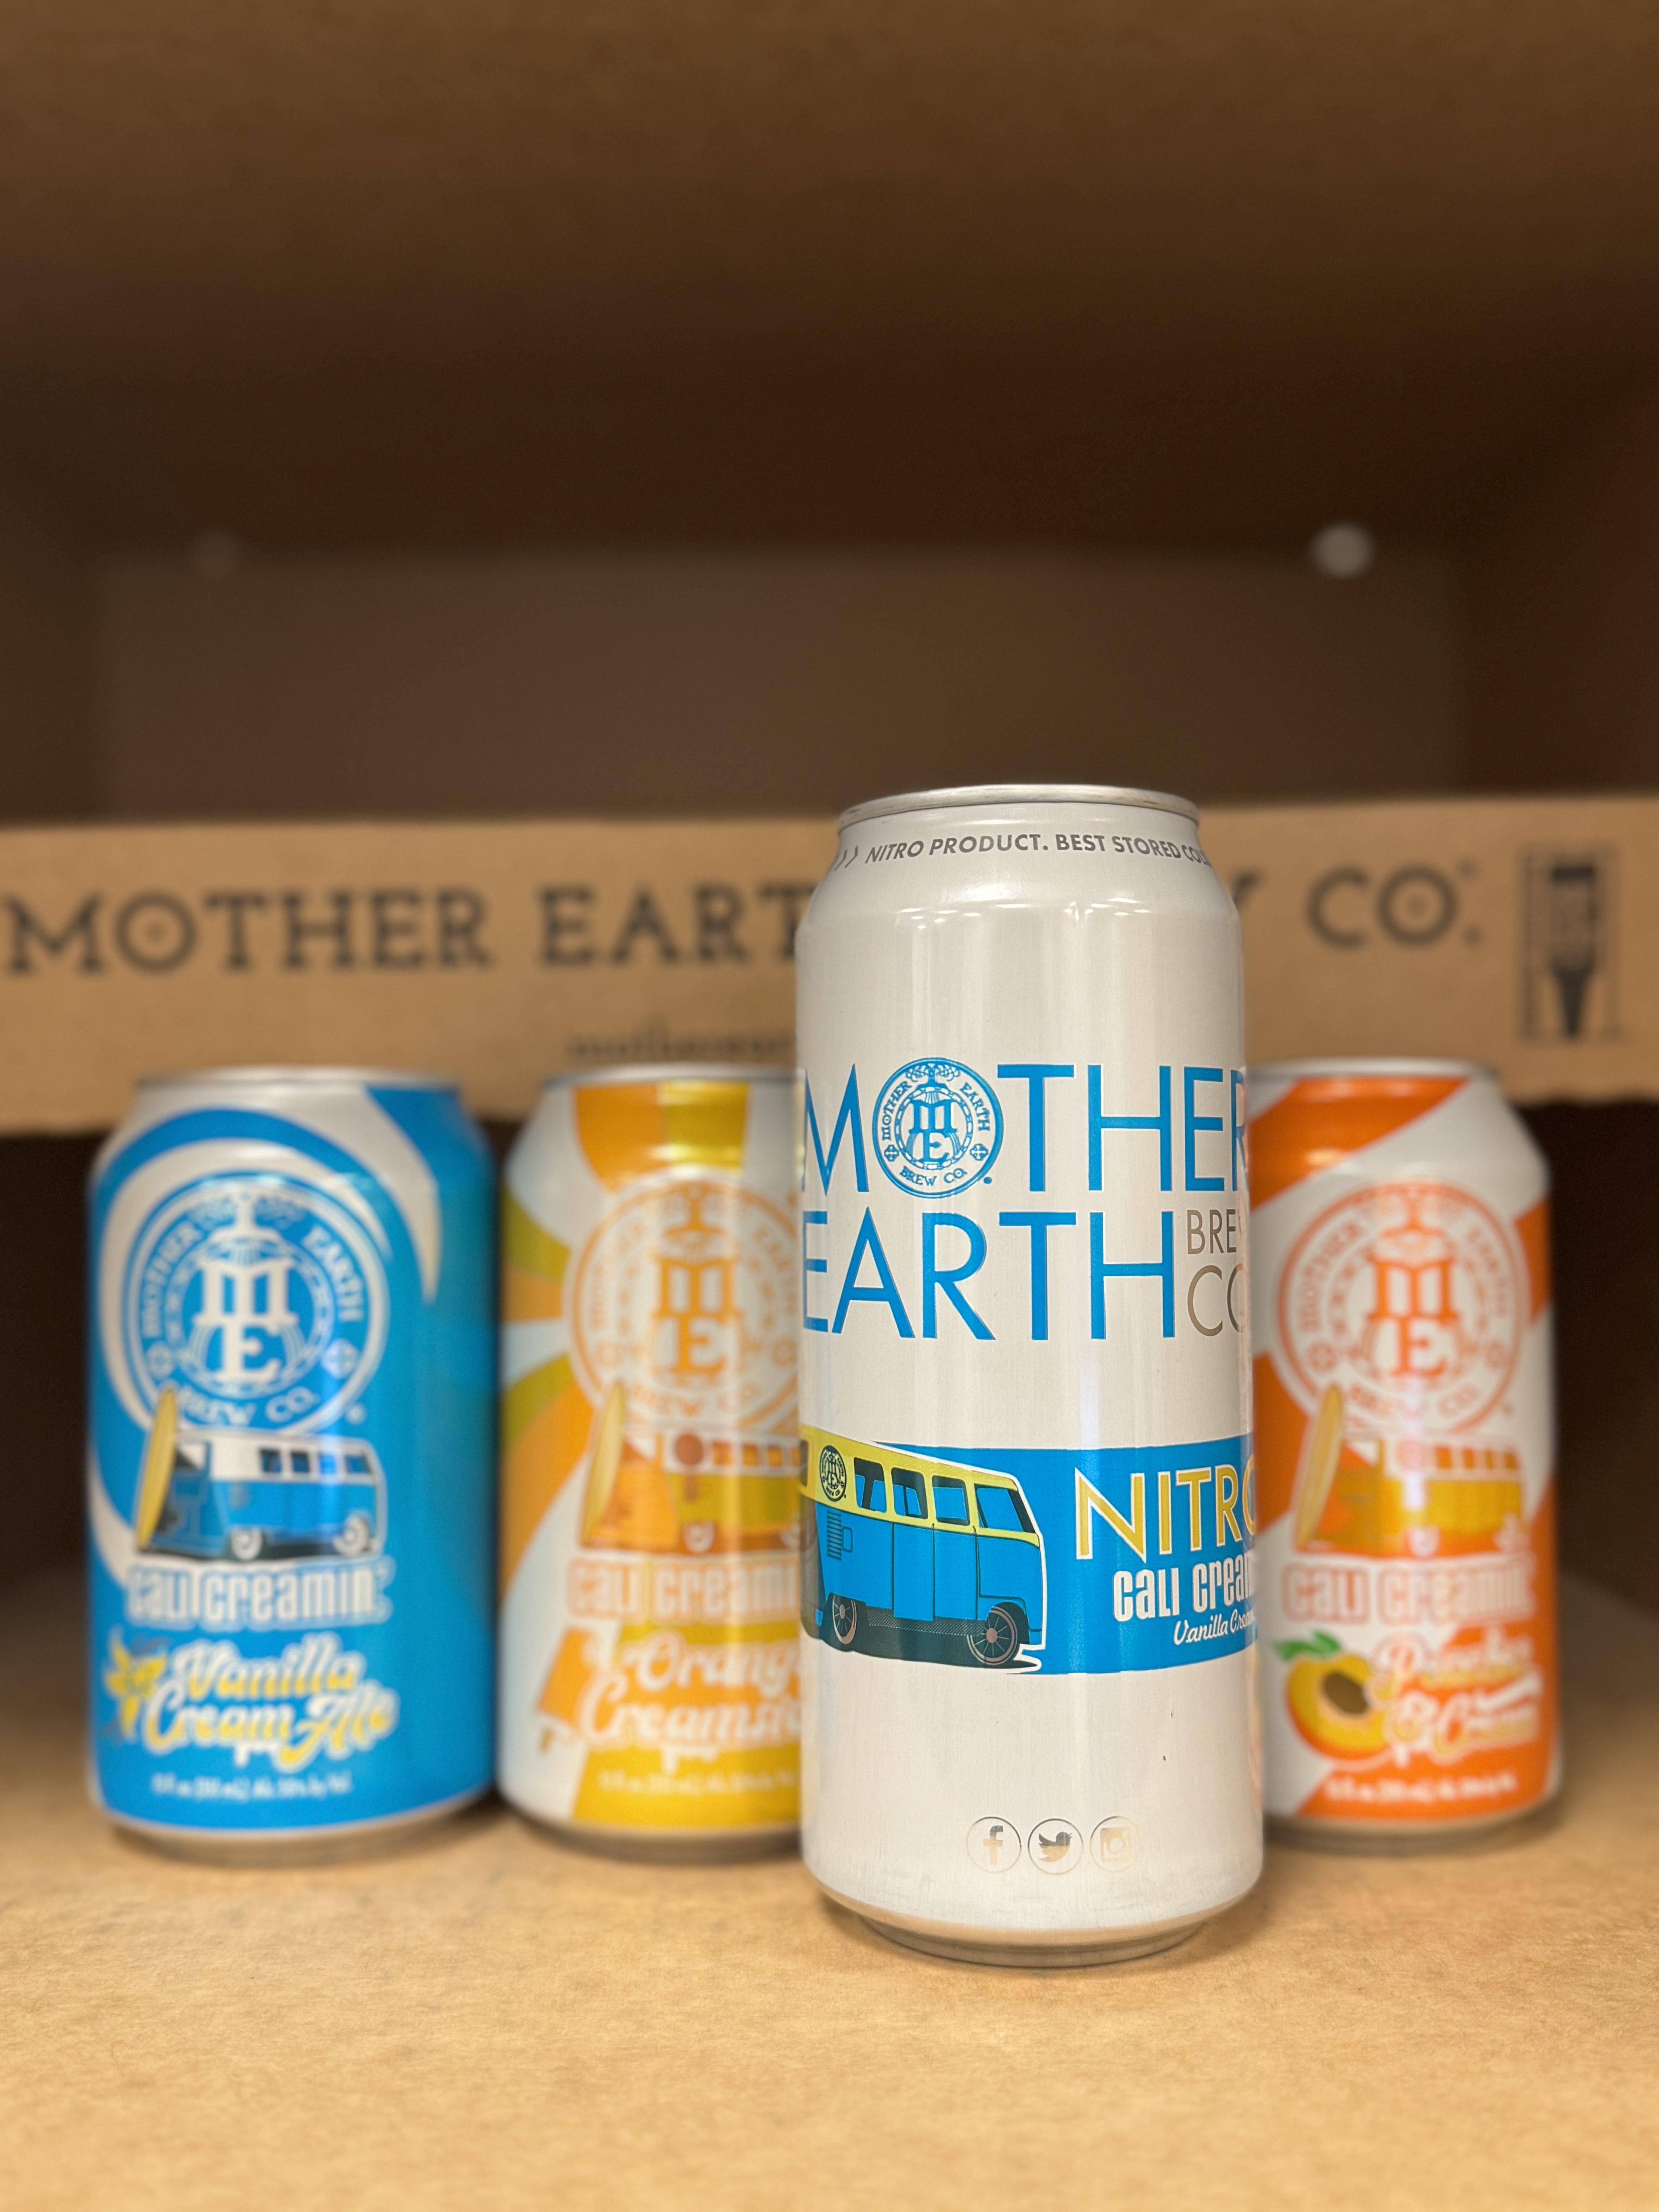 -Mother Earth- Mother Earth 🚀 Take Off Set 2-Packs & Cases- Only @ Beer Republic - The best online beer store for American & Canadian craft beer - Buy beer online from the USA and Canada - Bier online kopen - Amerikaans bier kopen - Craft beer store - Craft beer kopen - Amerikanisch bier kaufen - Bier online kaufen - Acheter biere online - IPA - Stout - Porter - New England IPA - Hazy IPA - Imperial Stout - Barrel Aged - Barrel Aged Imperial Stout - Brown - Dark beer - Blond - Blonde - Pilsner - Lager - Whe